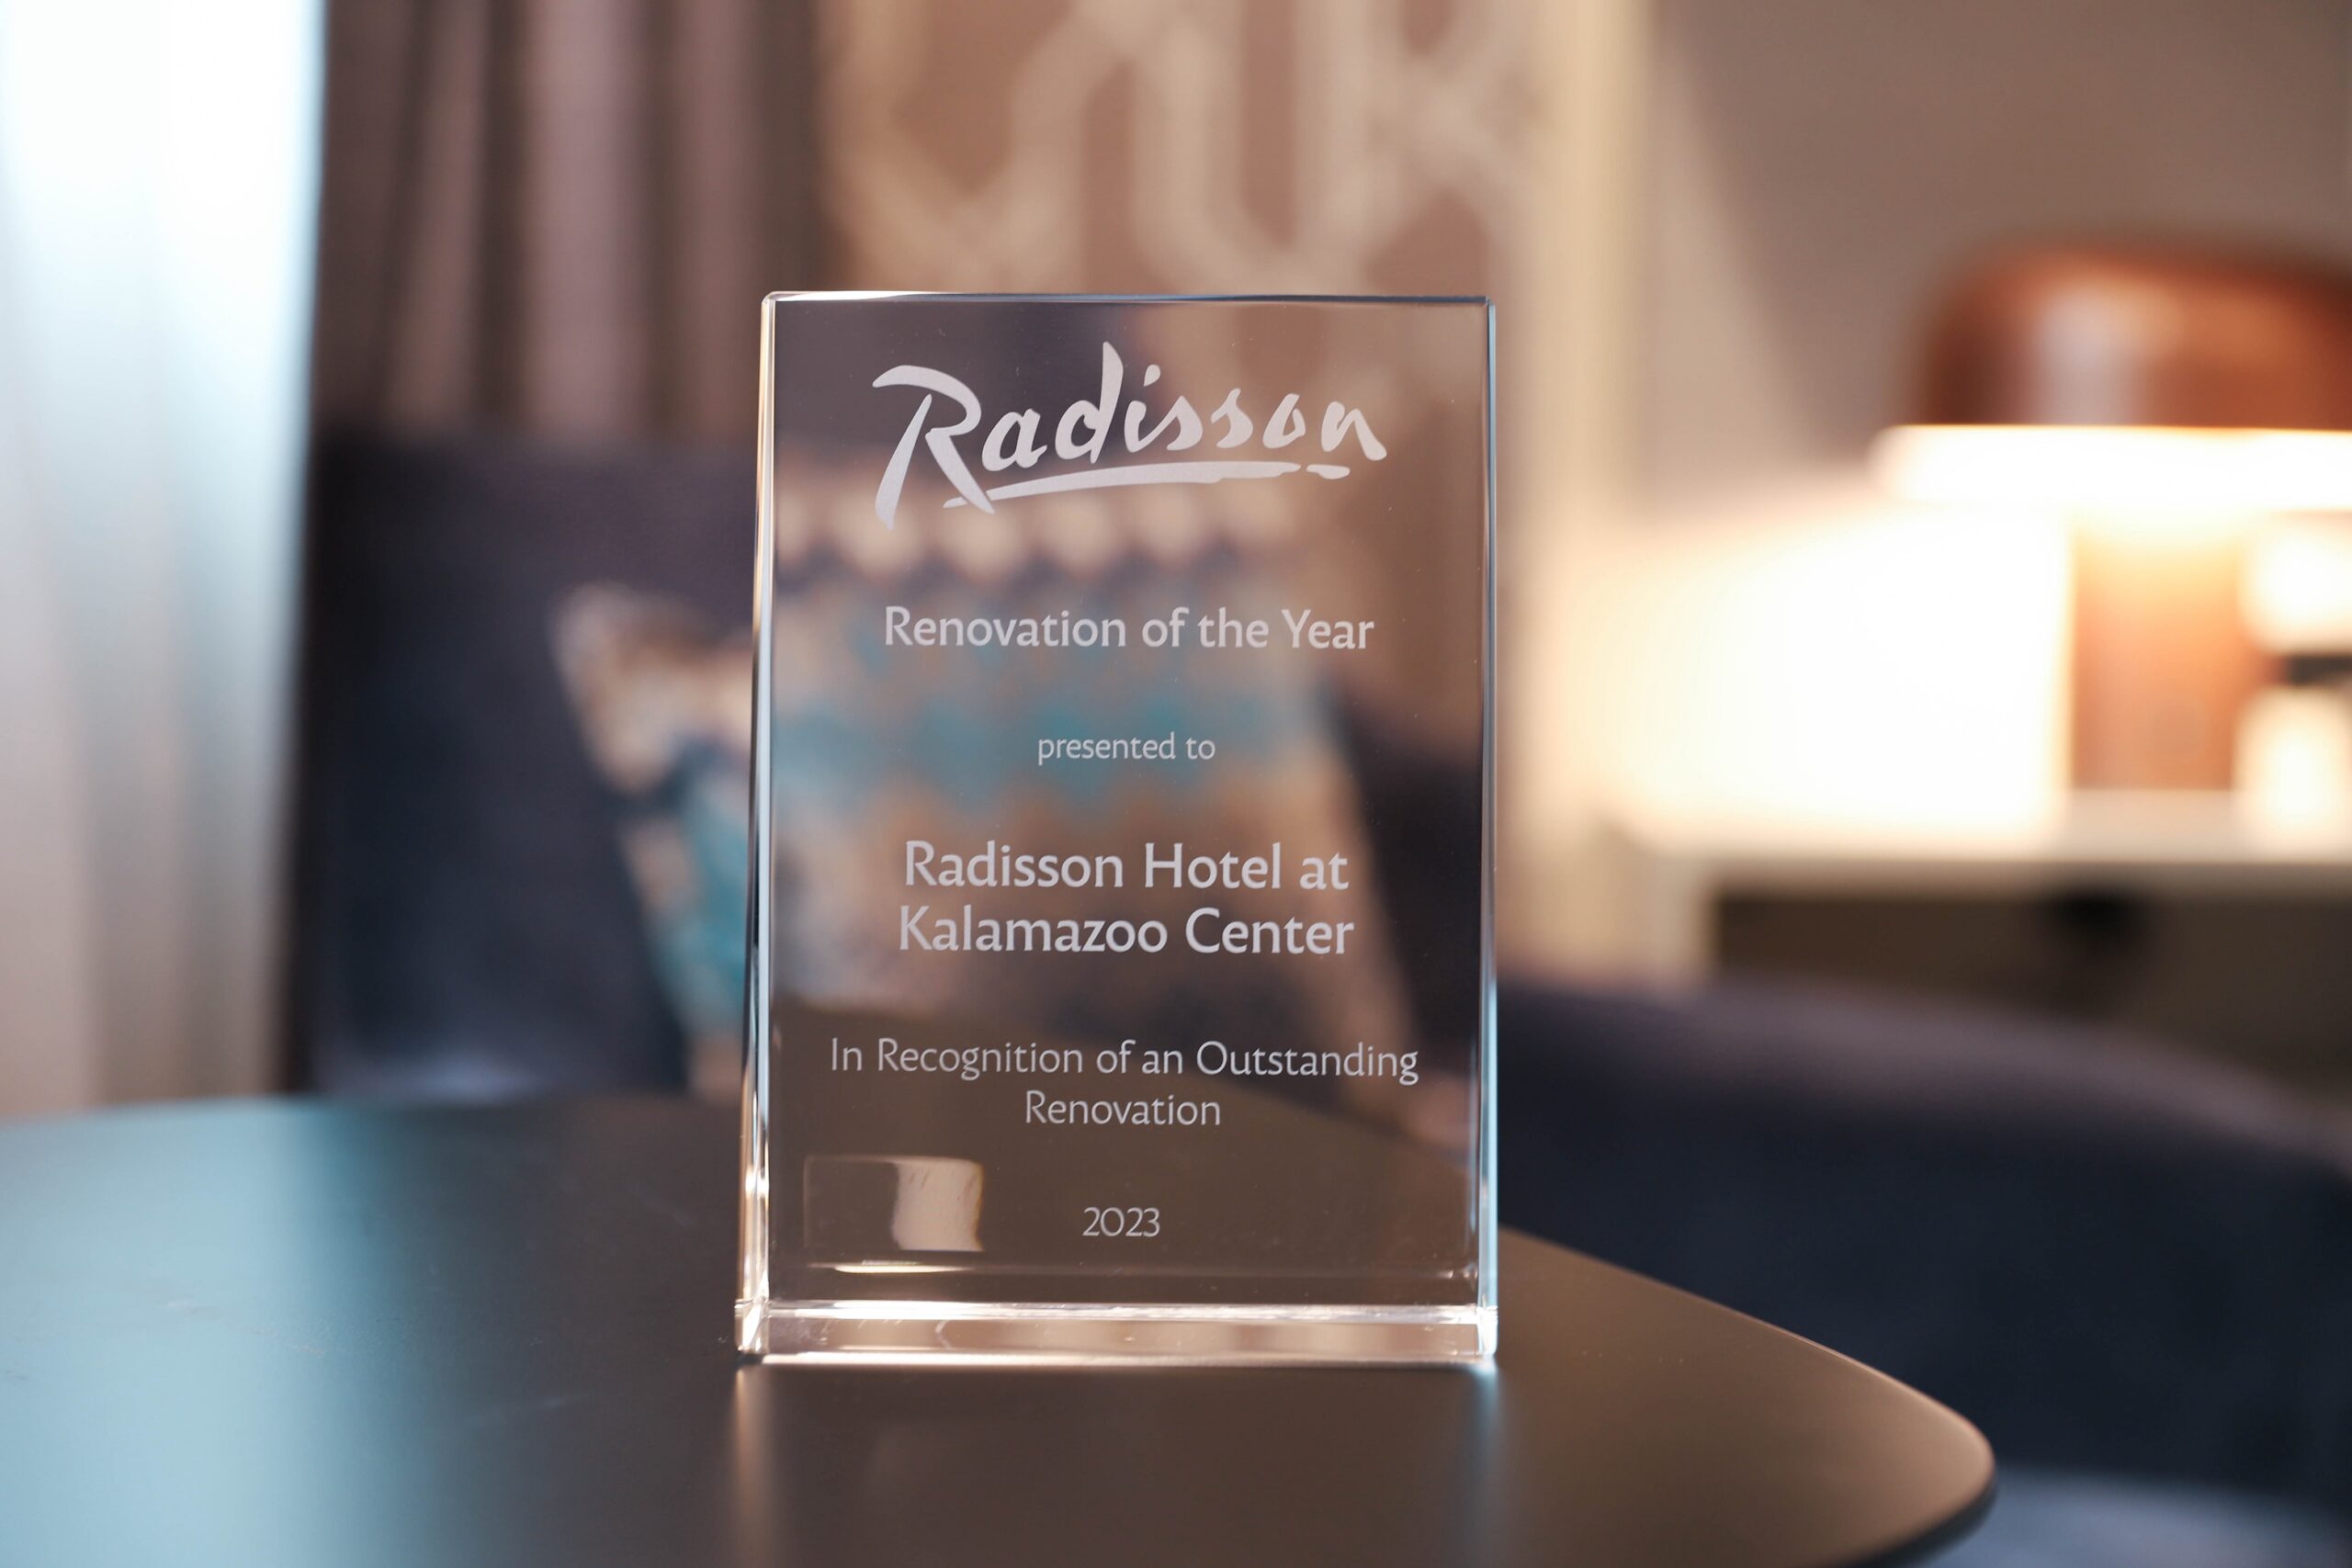 glass award for the Radisson Plaza Hotel noting the Renovation of the Year